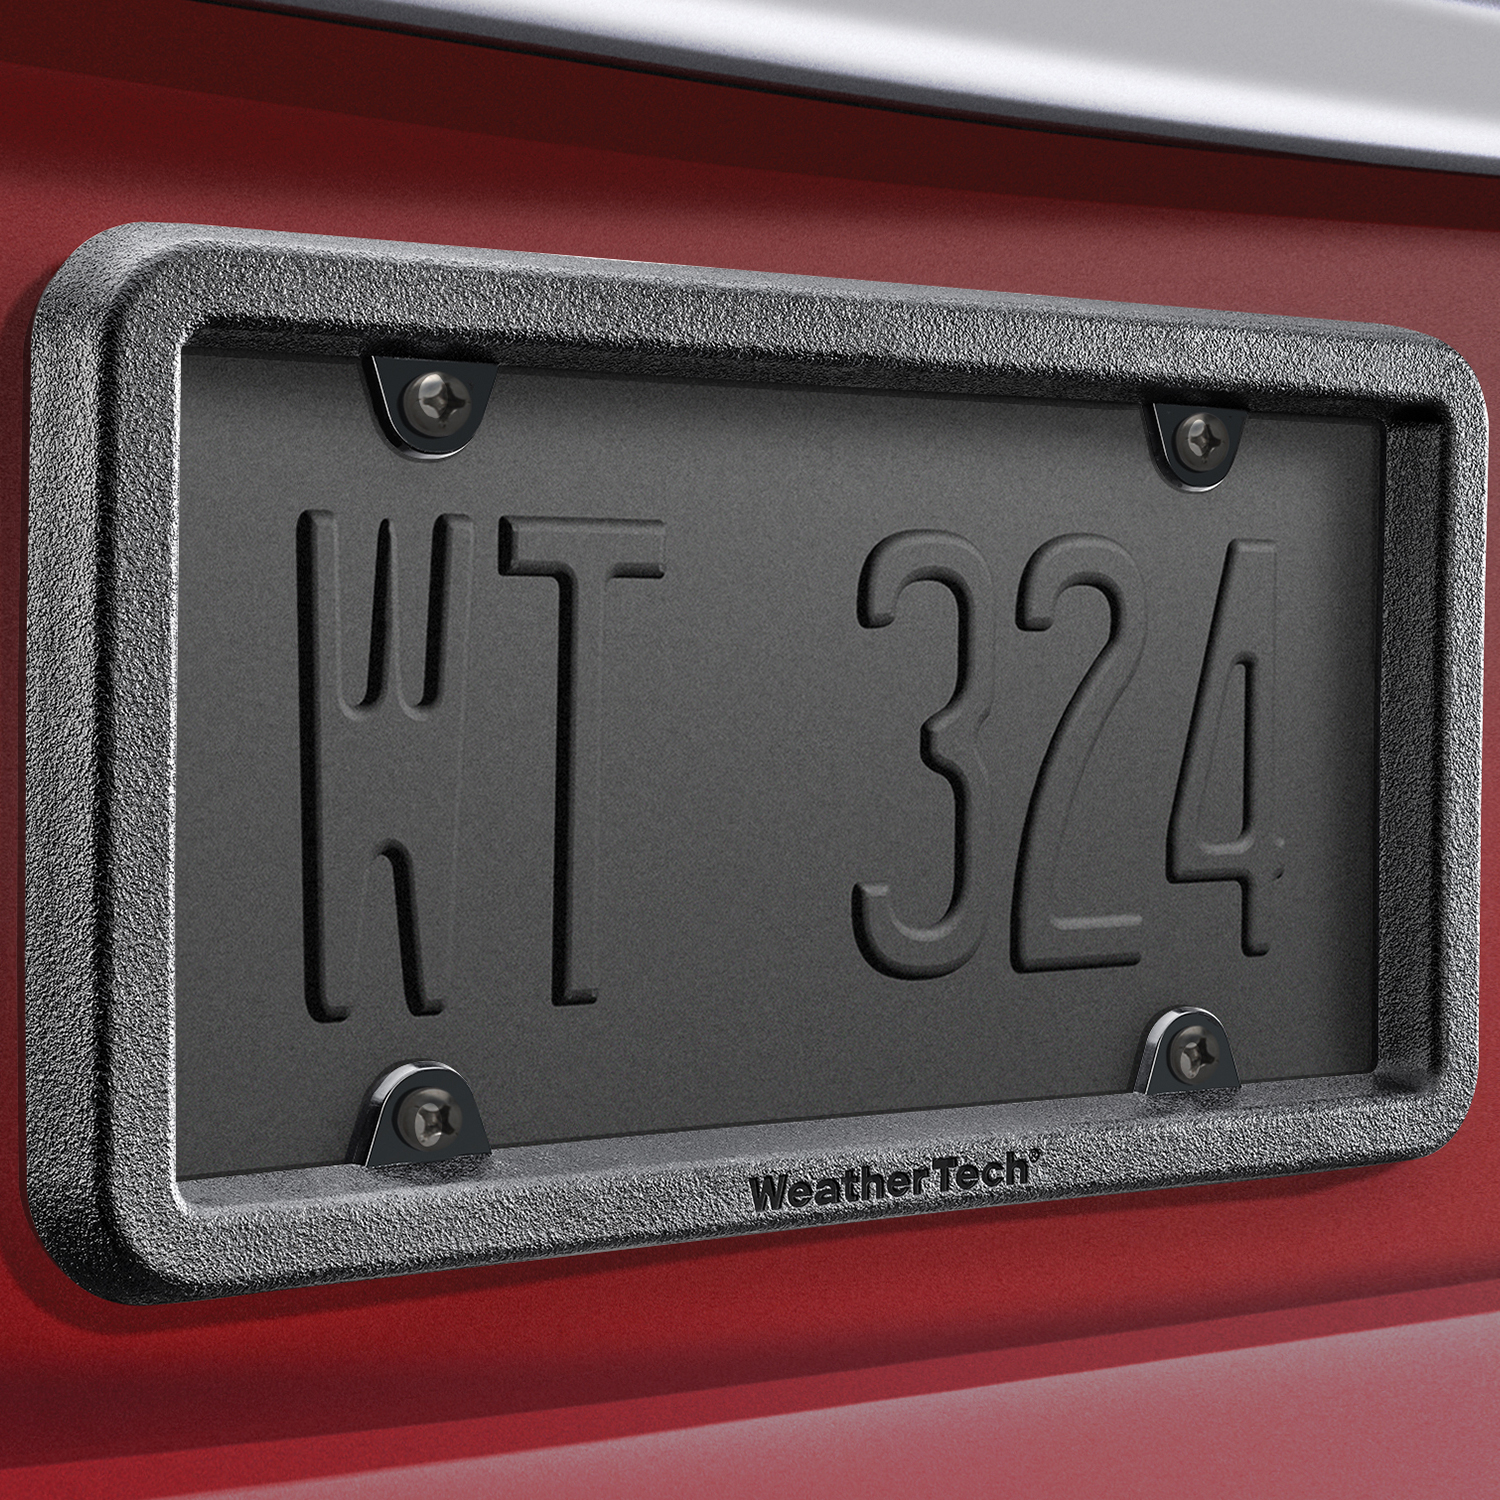 Every vehicle needs a license plate frame, so you might as well get one that is as functional as it is sleek looking. The WeatherTech&reg; BumpFrame&reg; is something every vehicle needs to help protect your front end from the many bumps and scratches that can happen every day, from parallel parking to other driver accidents to grocery cart oops moments or kids playing.